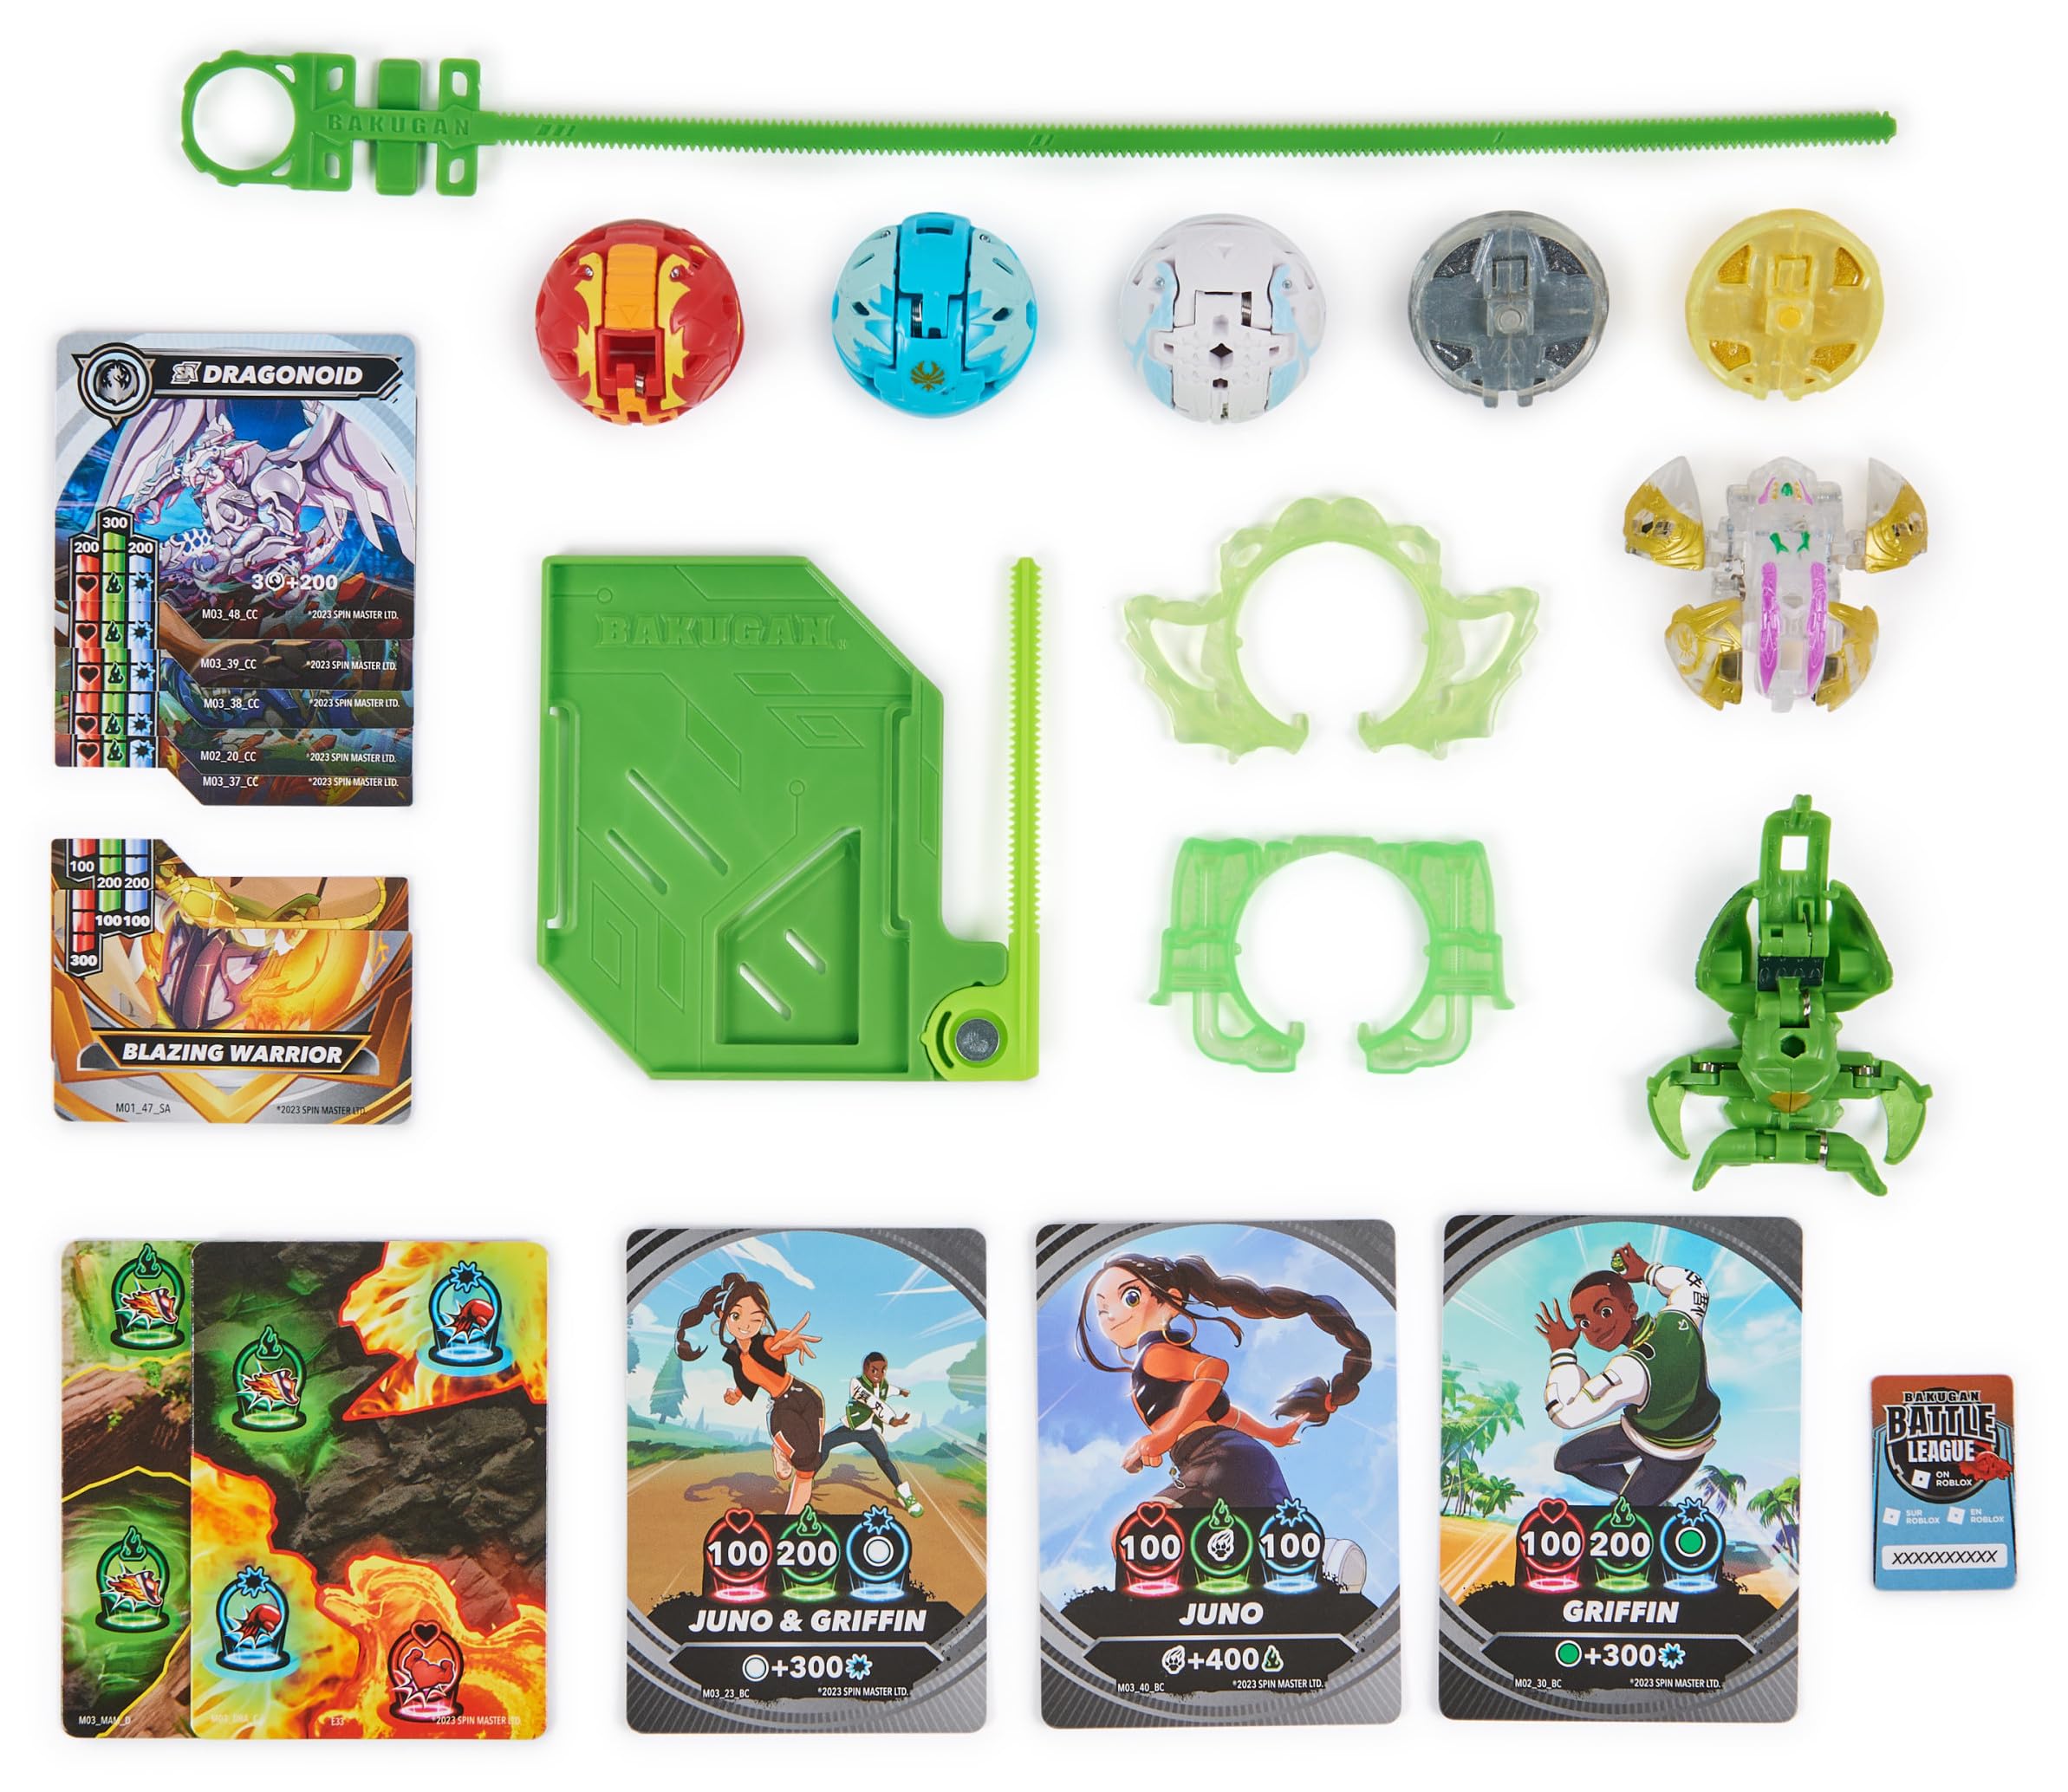 Bakugan Battle 5-Pack, Special Attack Octagan, Spidra, Hail, Nillious, Ventri, Articulated Figures Customizable Spinning, Toys for Boys and Girls Ages 6 and Up